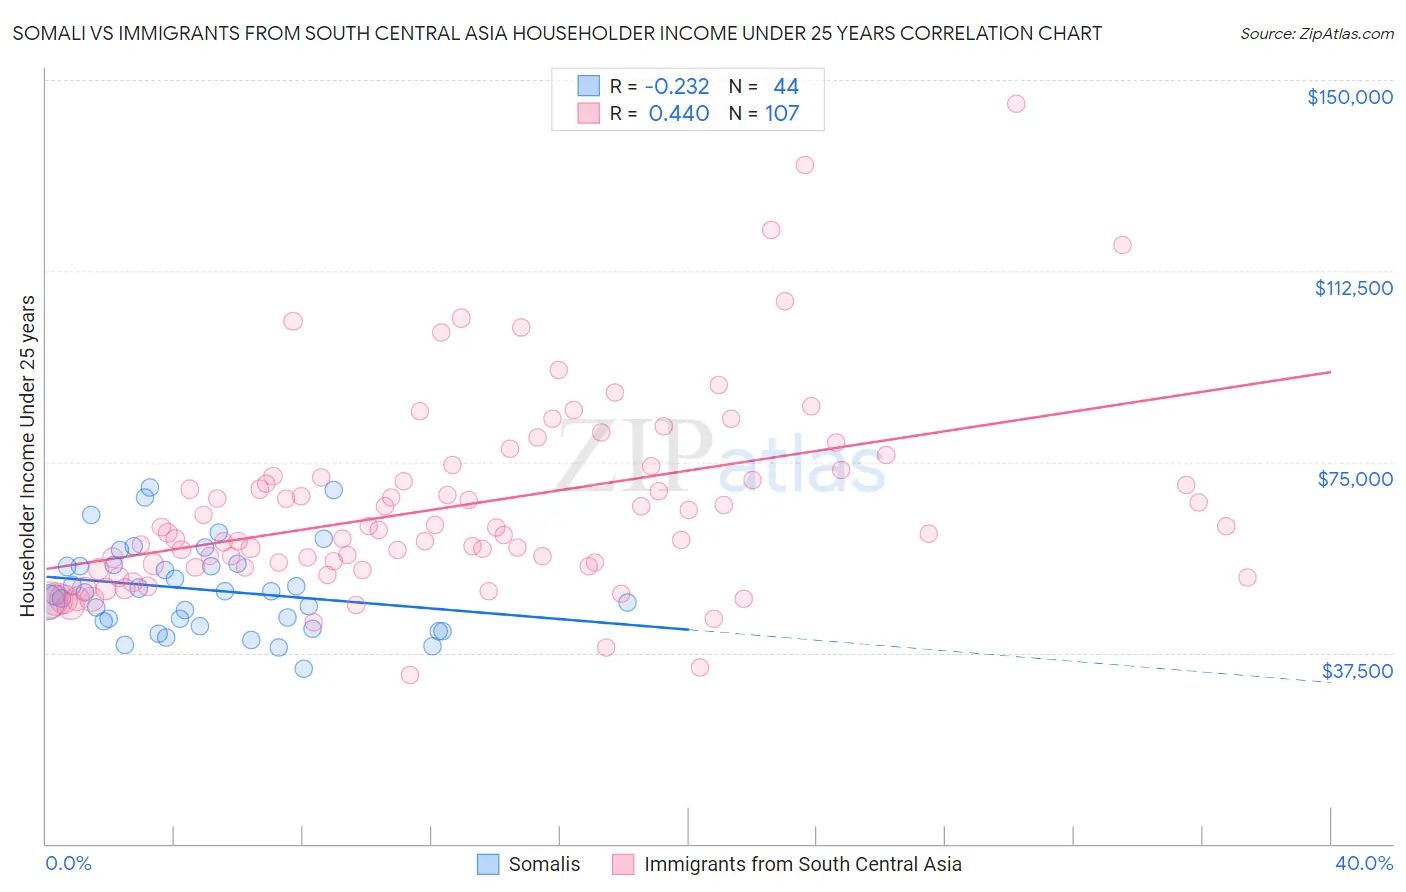 Somali vs Immigrants from South Central Asia Householder Income Under 25 years